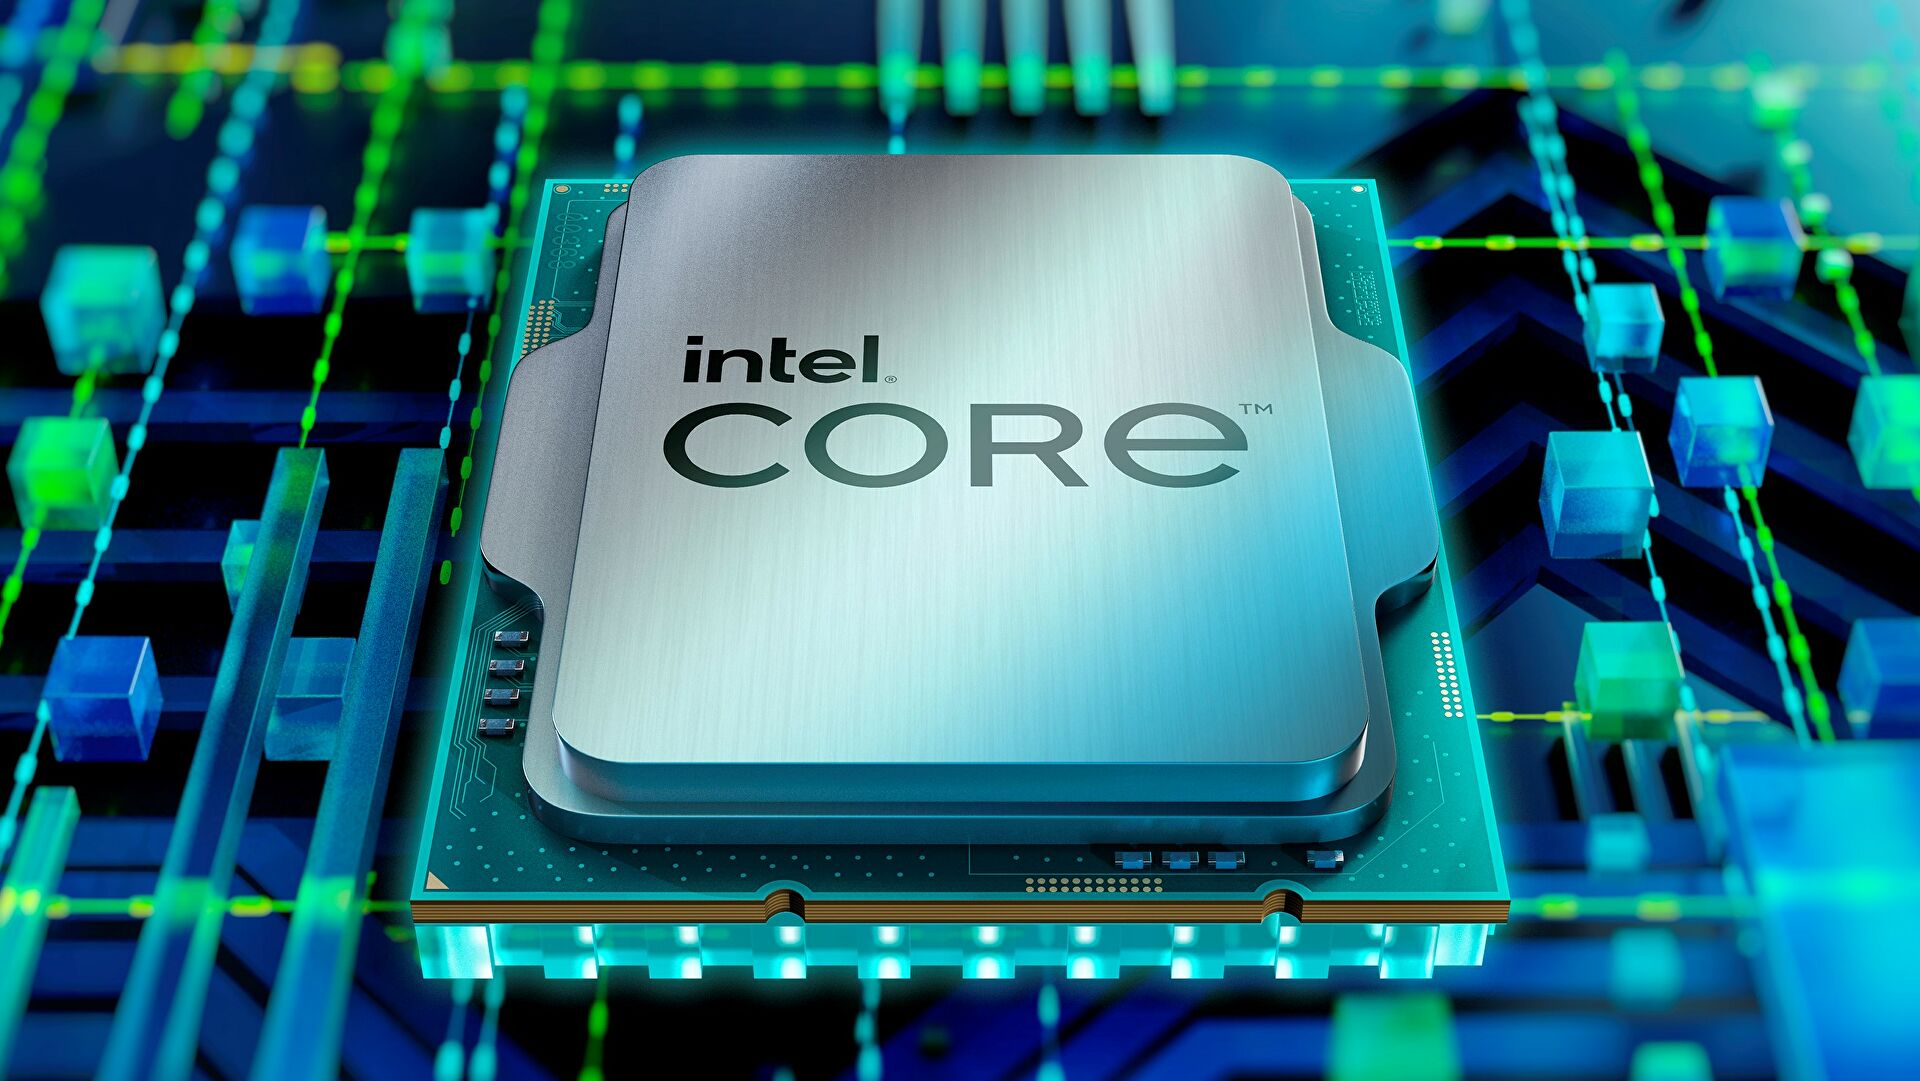 The Intel Core i9-13900K Raptor Lake would be 15% faster than the Core i9-12900K and 35% faster than the AMD Ryzen 9 5950X.